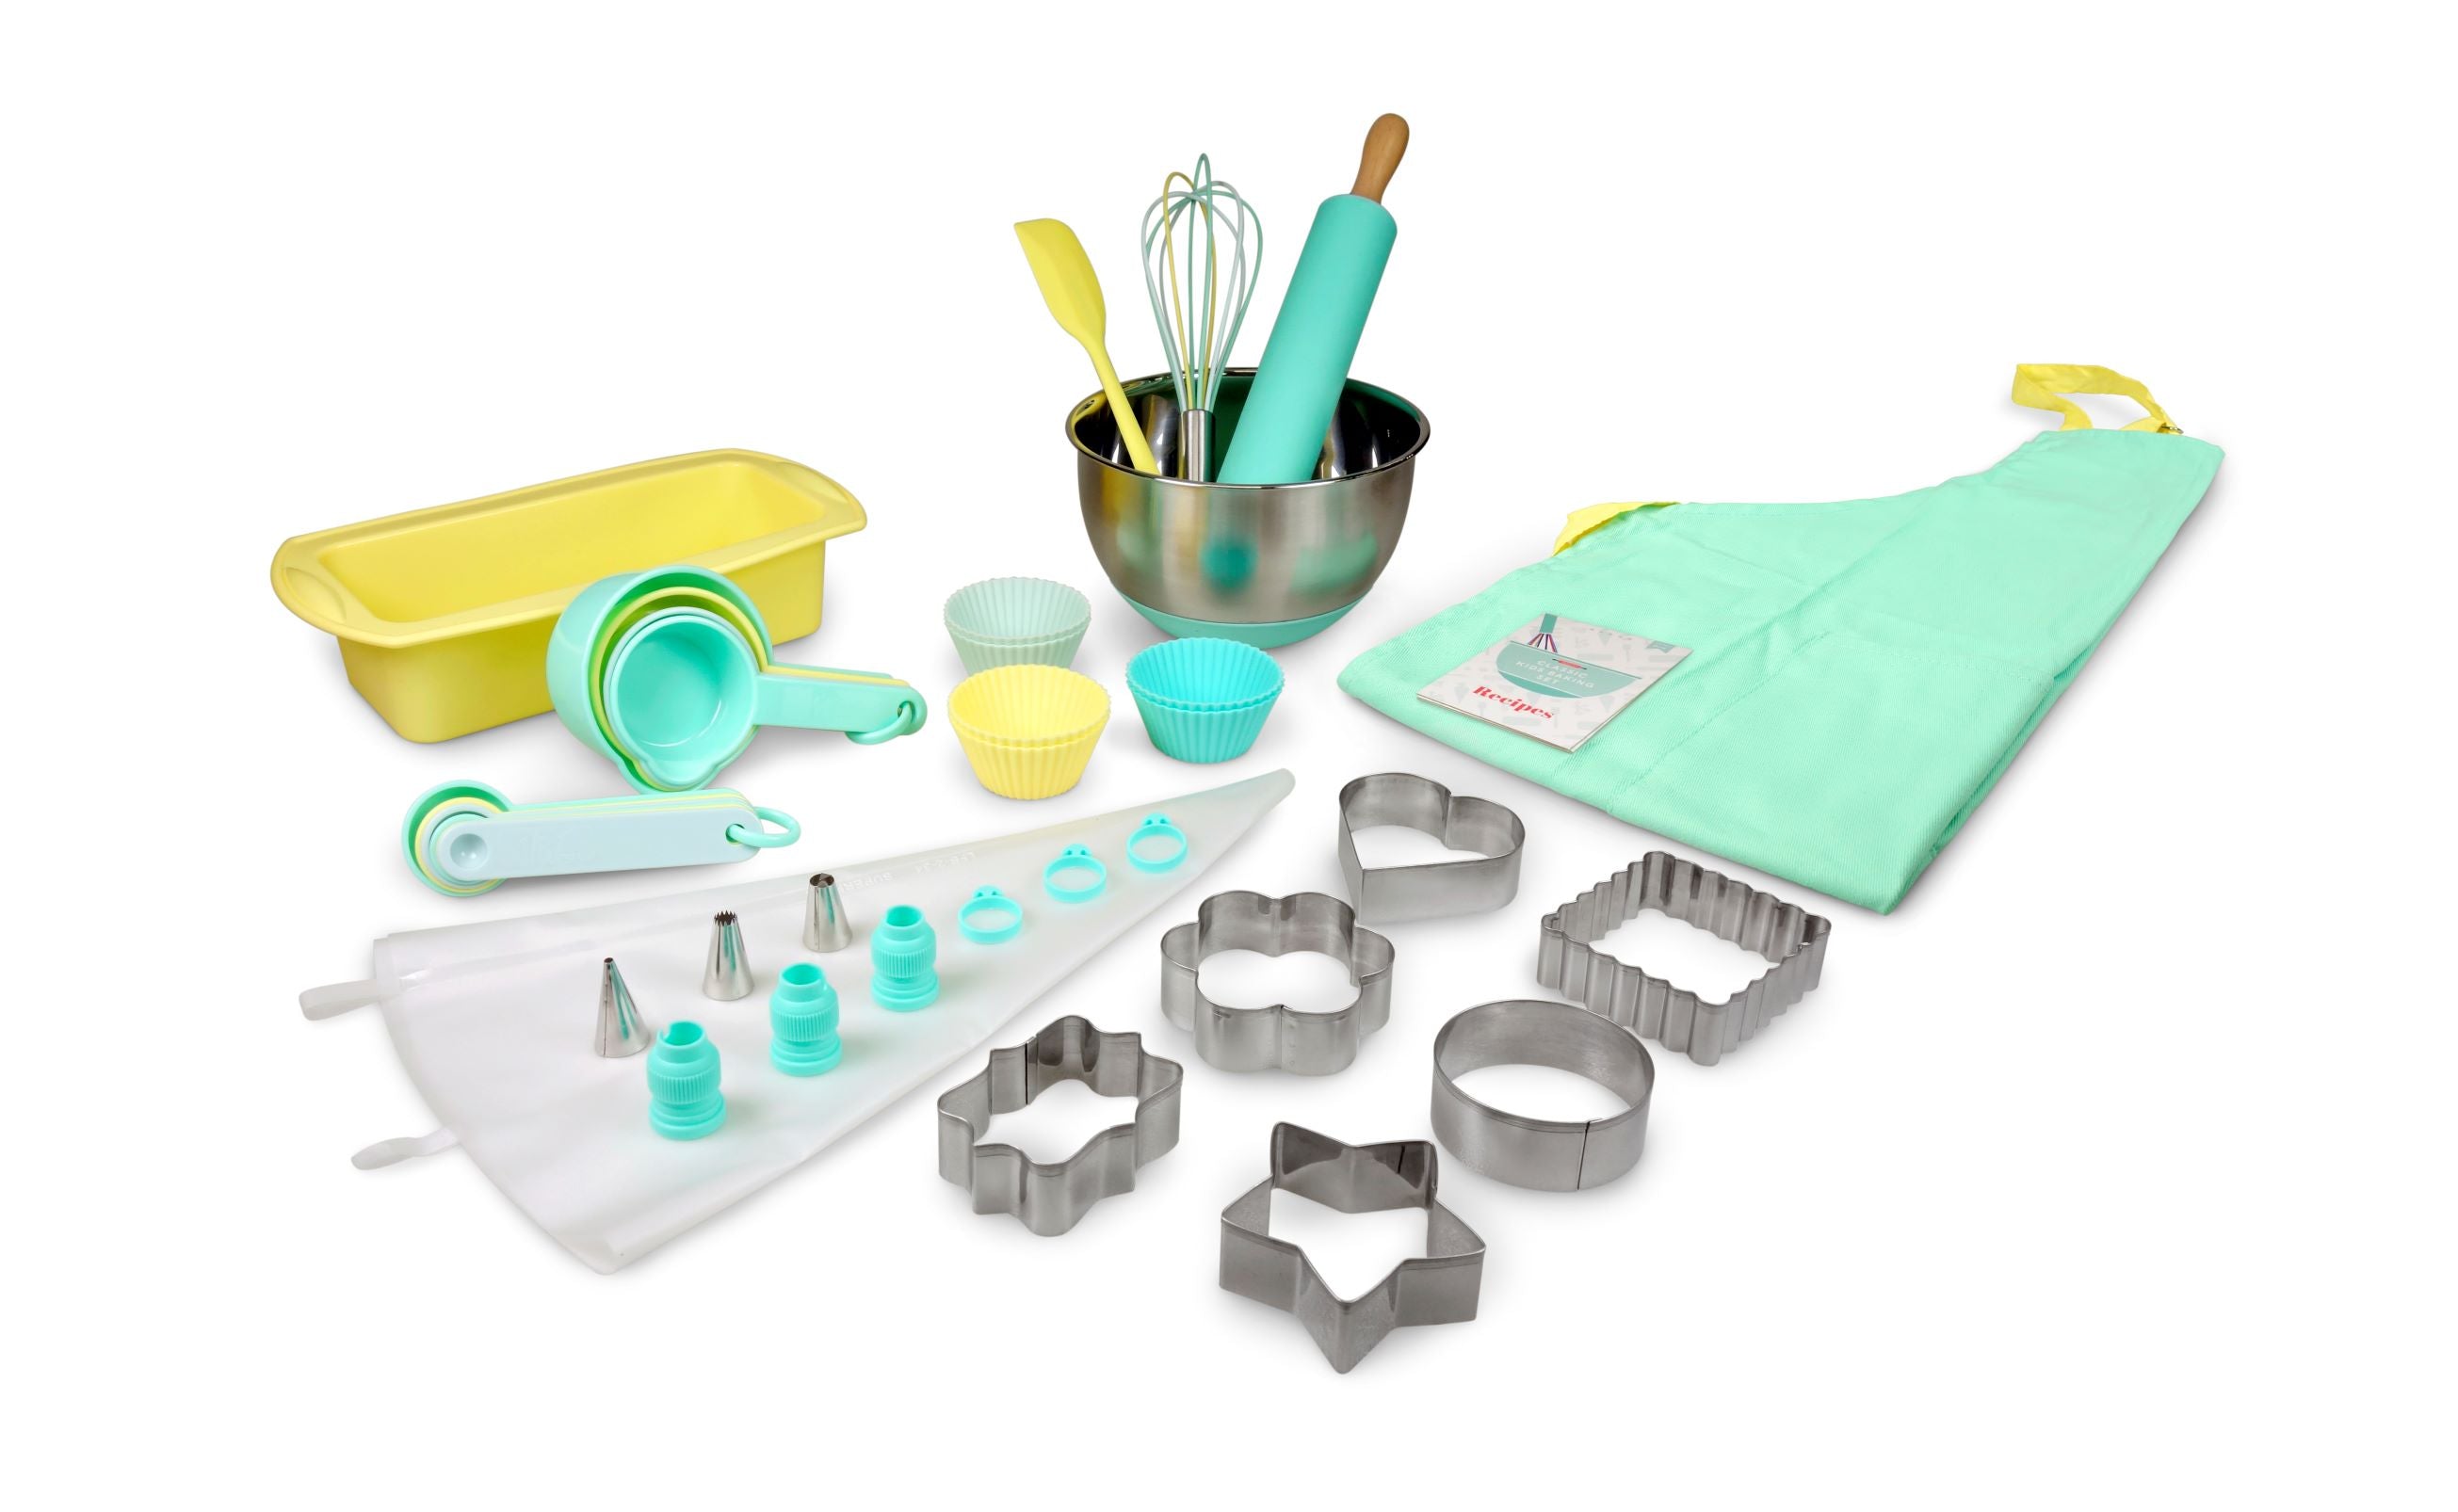 Out of box image of Classic Kids Baking Set with contents laid out